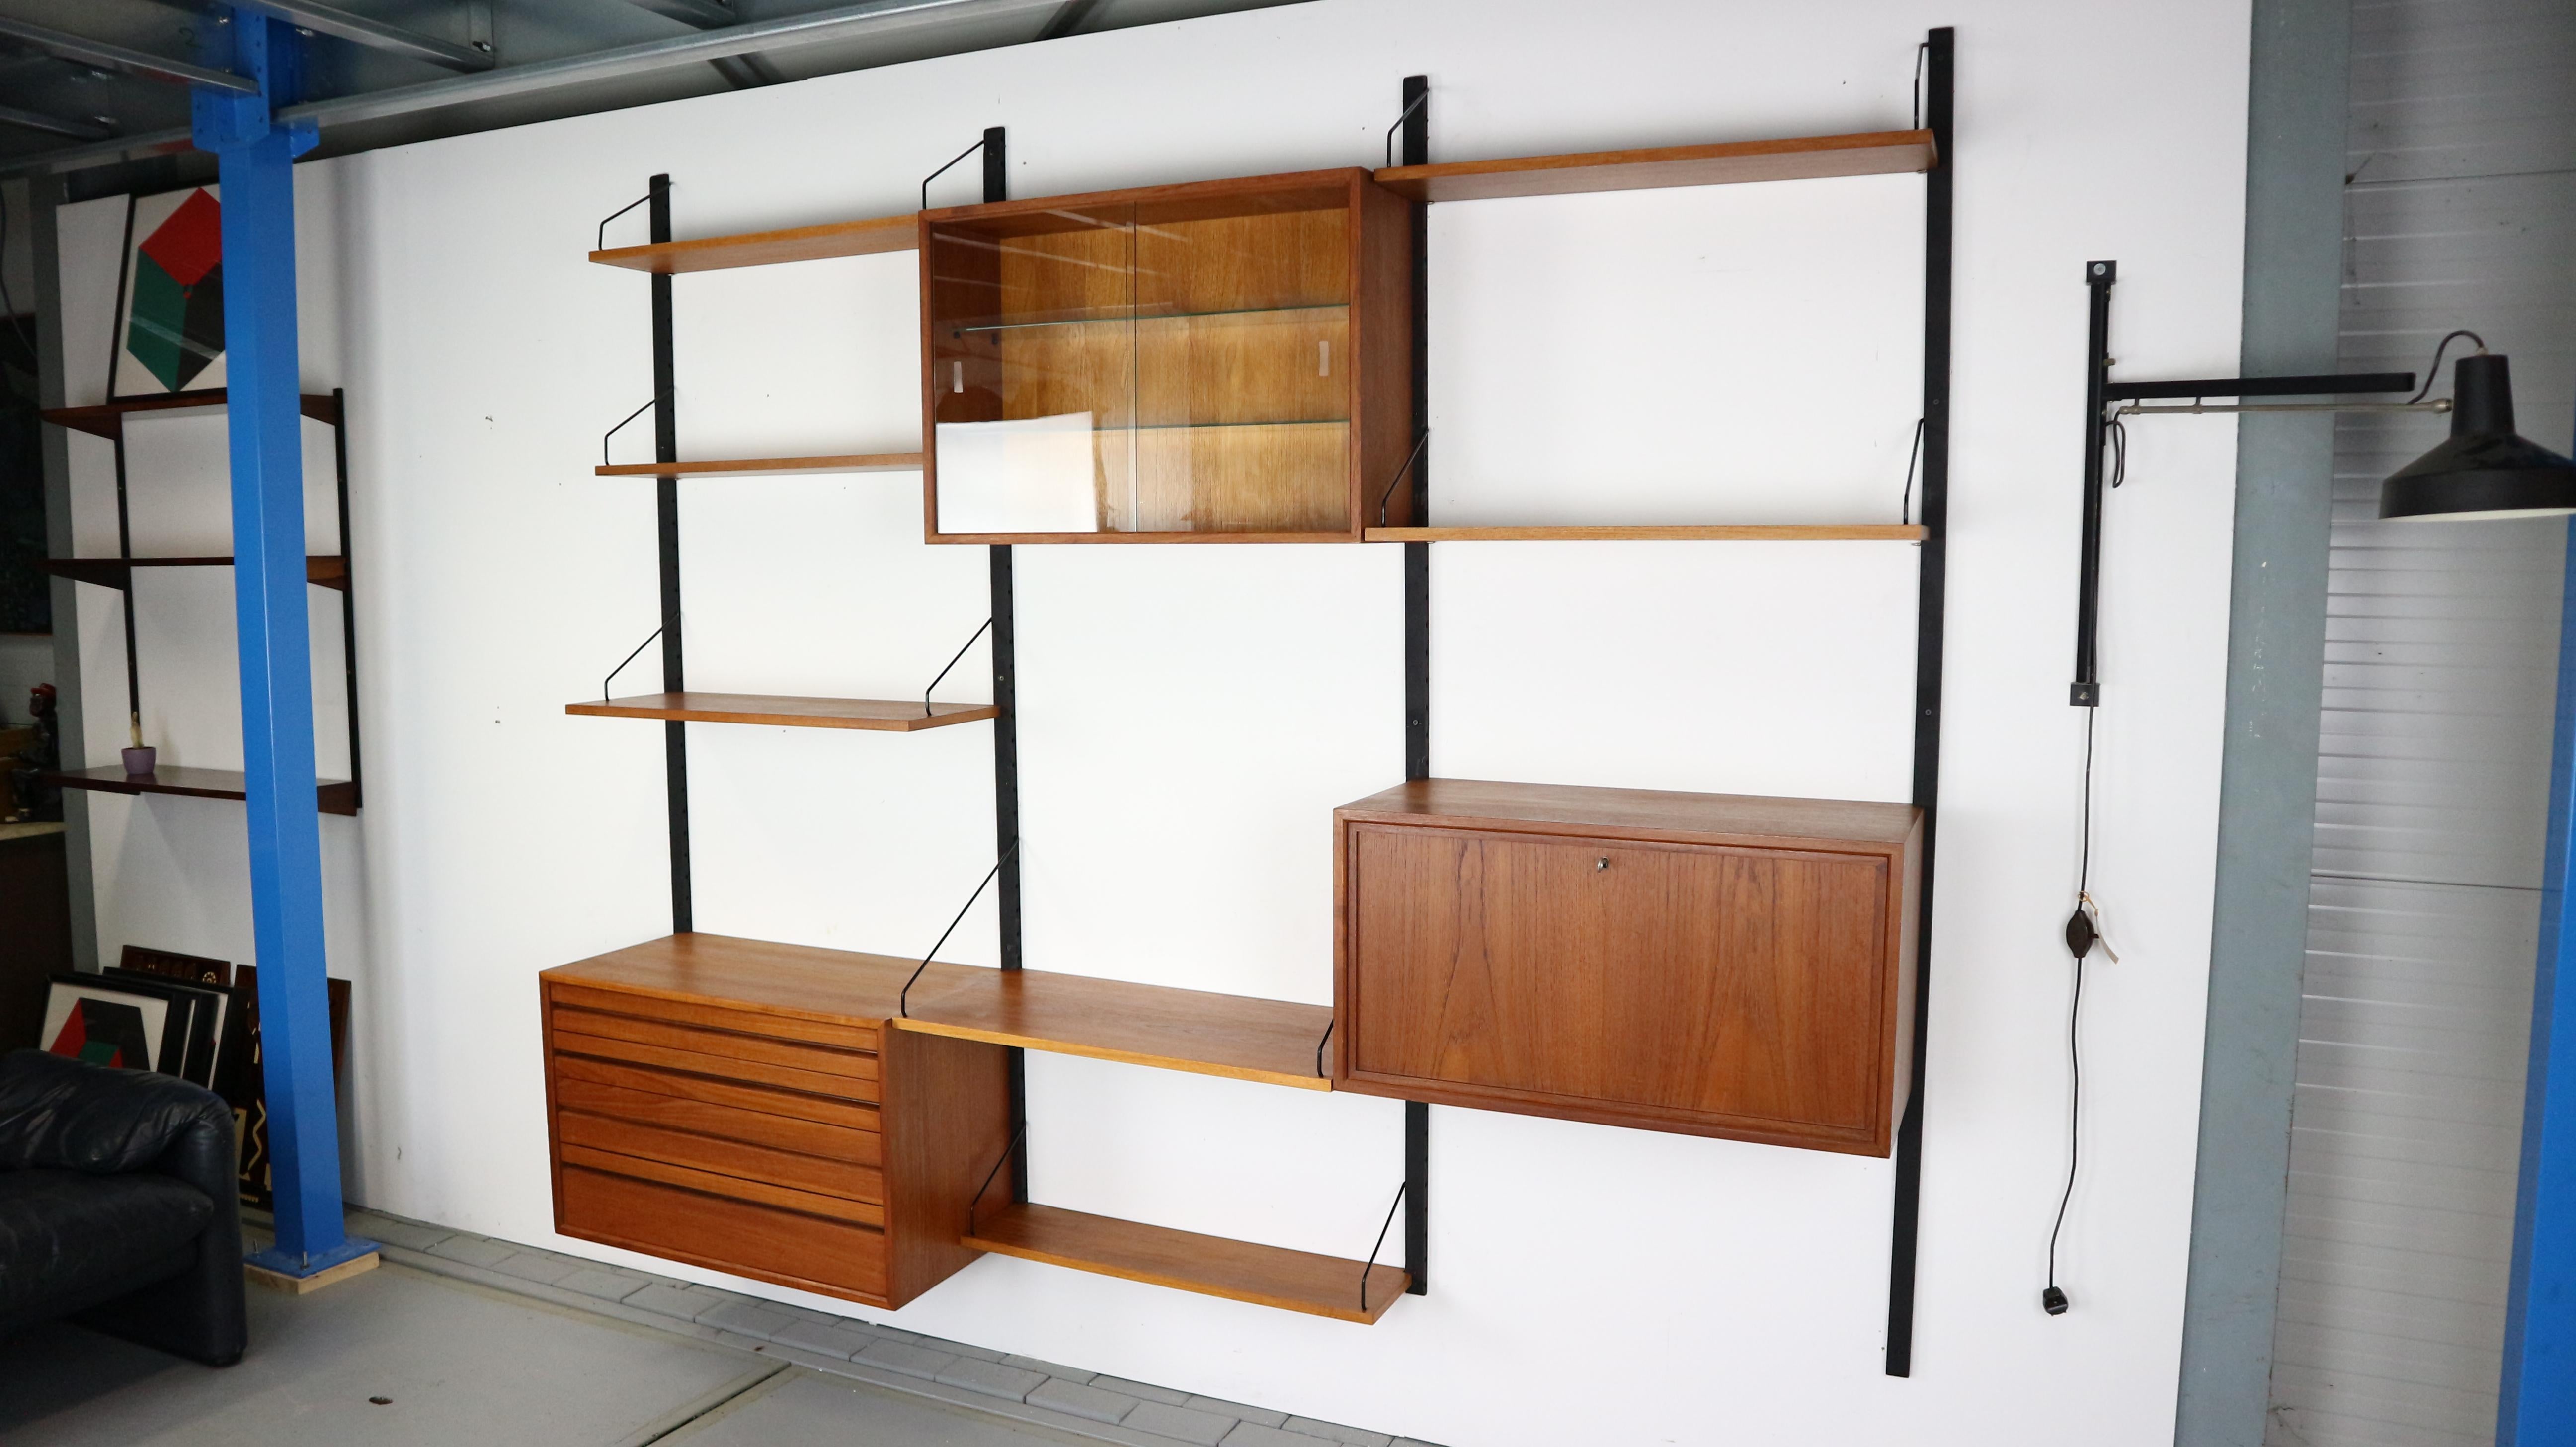 Teak wooden Danish Royal system designed by Poul Cadovius for Cado, Denmark in the 1960s. 
This vintage wall system is made of: 3 wall slats of 200 cm, a cabinet with drawers inside, a cabinet with glass shelve inside, cabinet- writing desk and